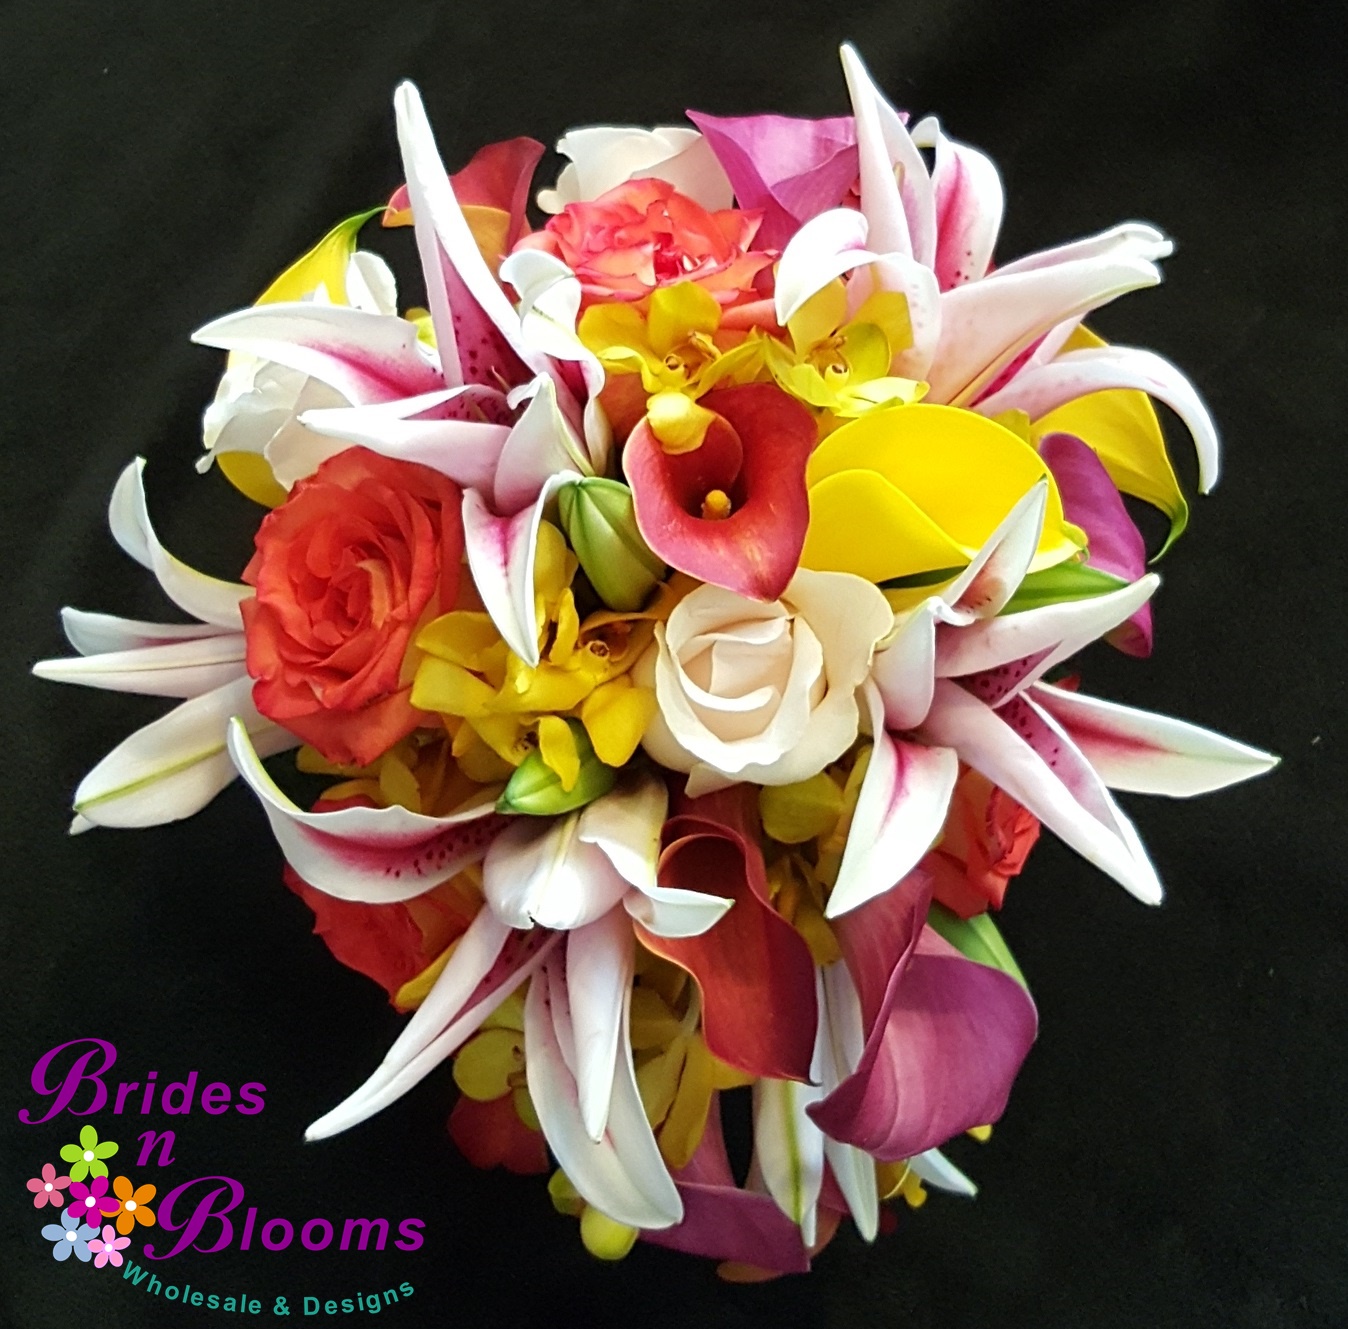 Teardrop Bridal Bouquet with Stargazer Lily, Mini Callas, Orchids & Roses